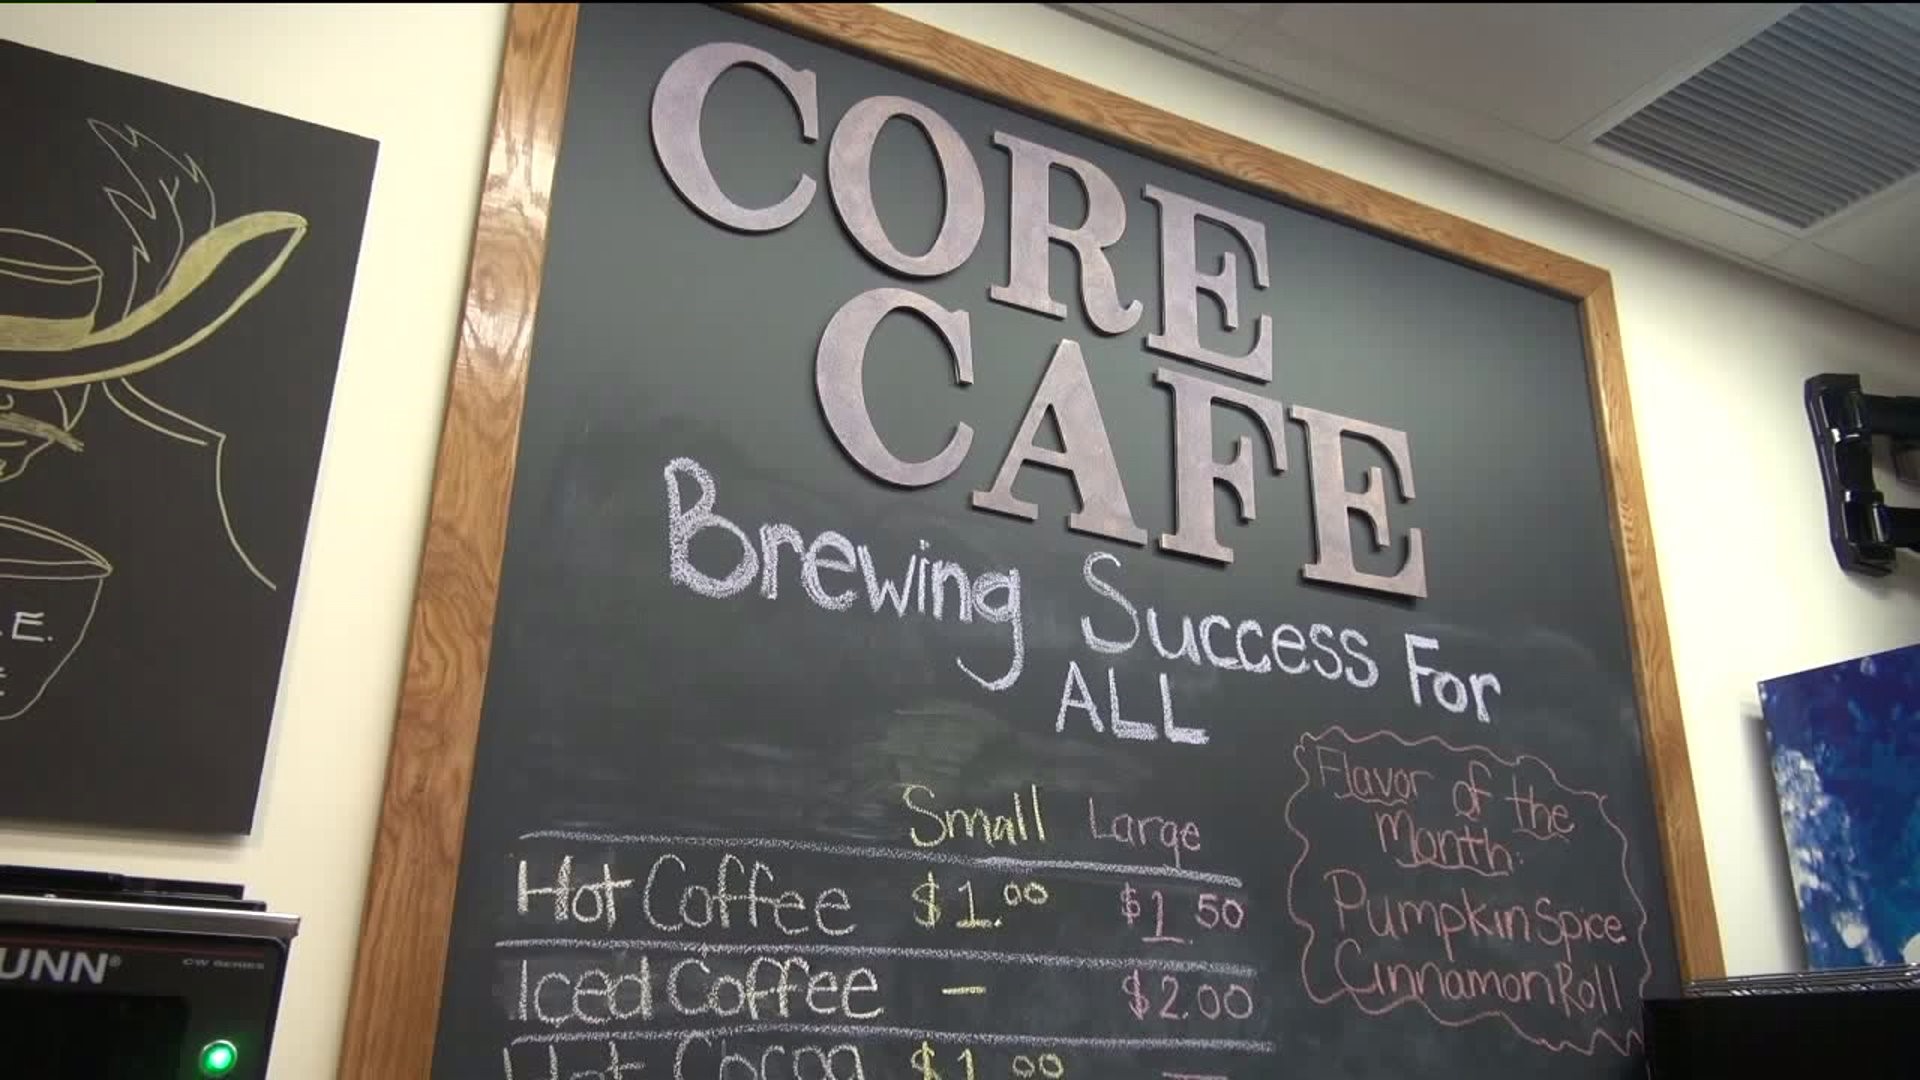 Students at East Stroudsburg South Brewing Up Success